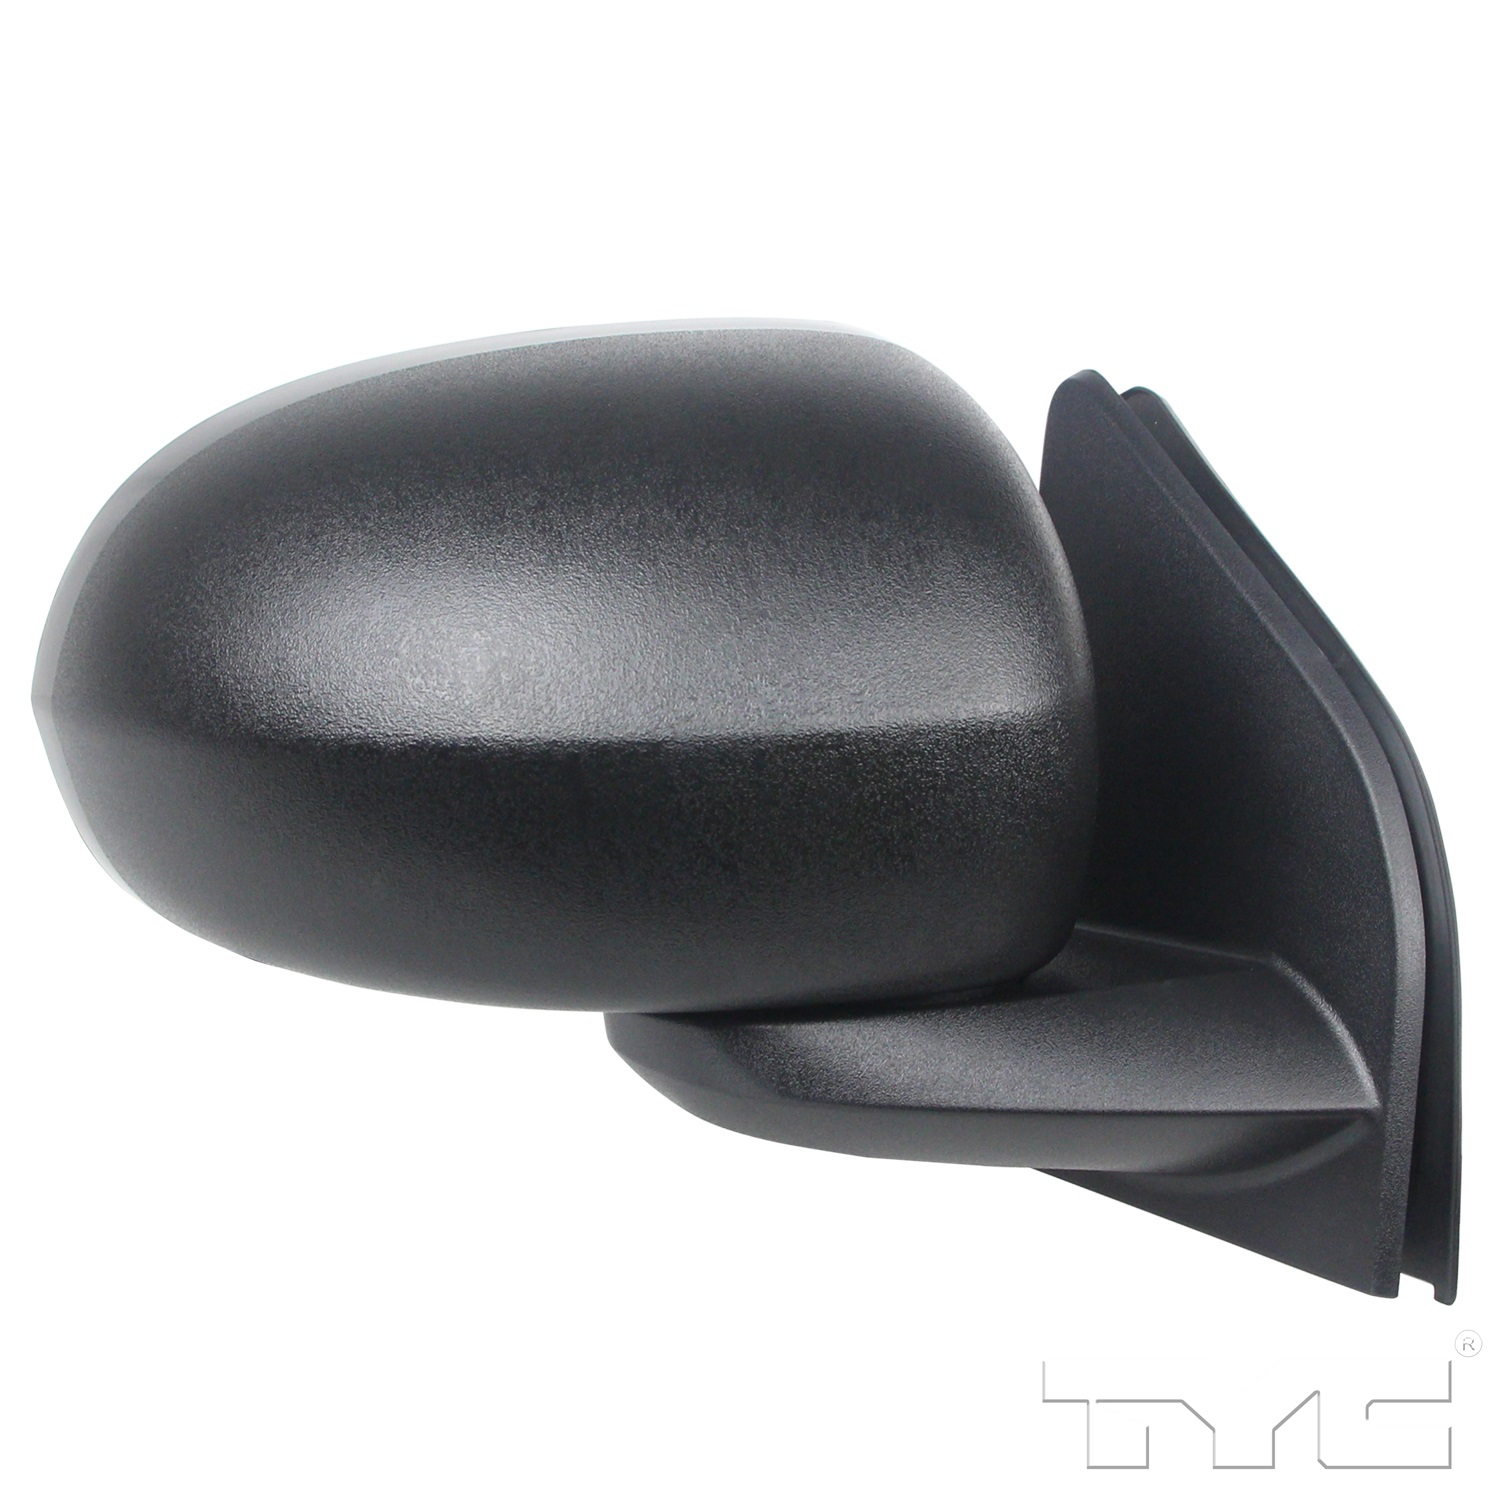 Aftermarket MIRRORS for JEEP - COMPASS, COMPASS,07-10,LT Mirror outside rear view